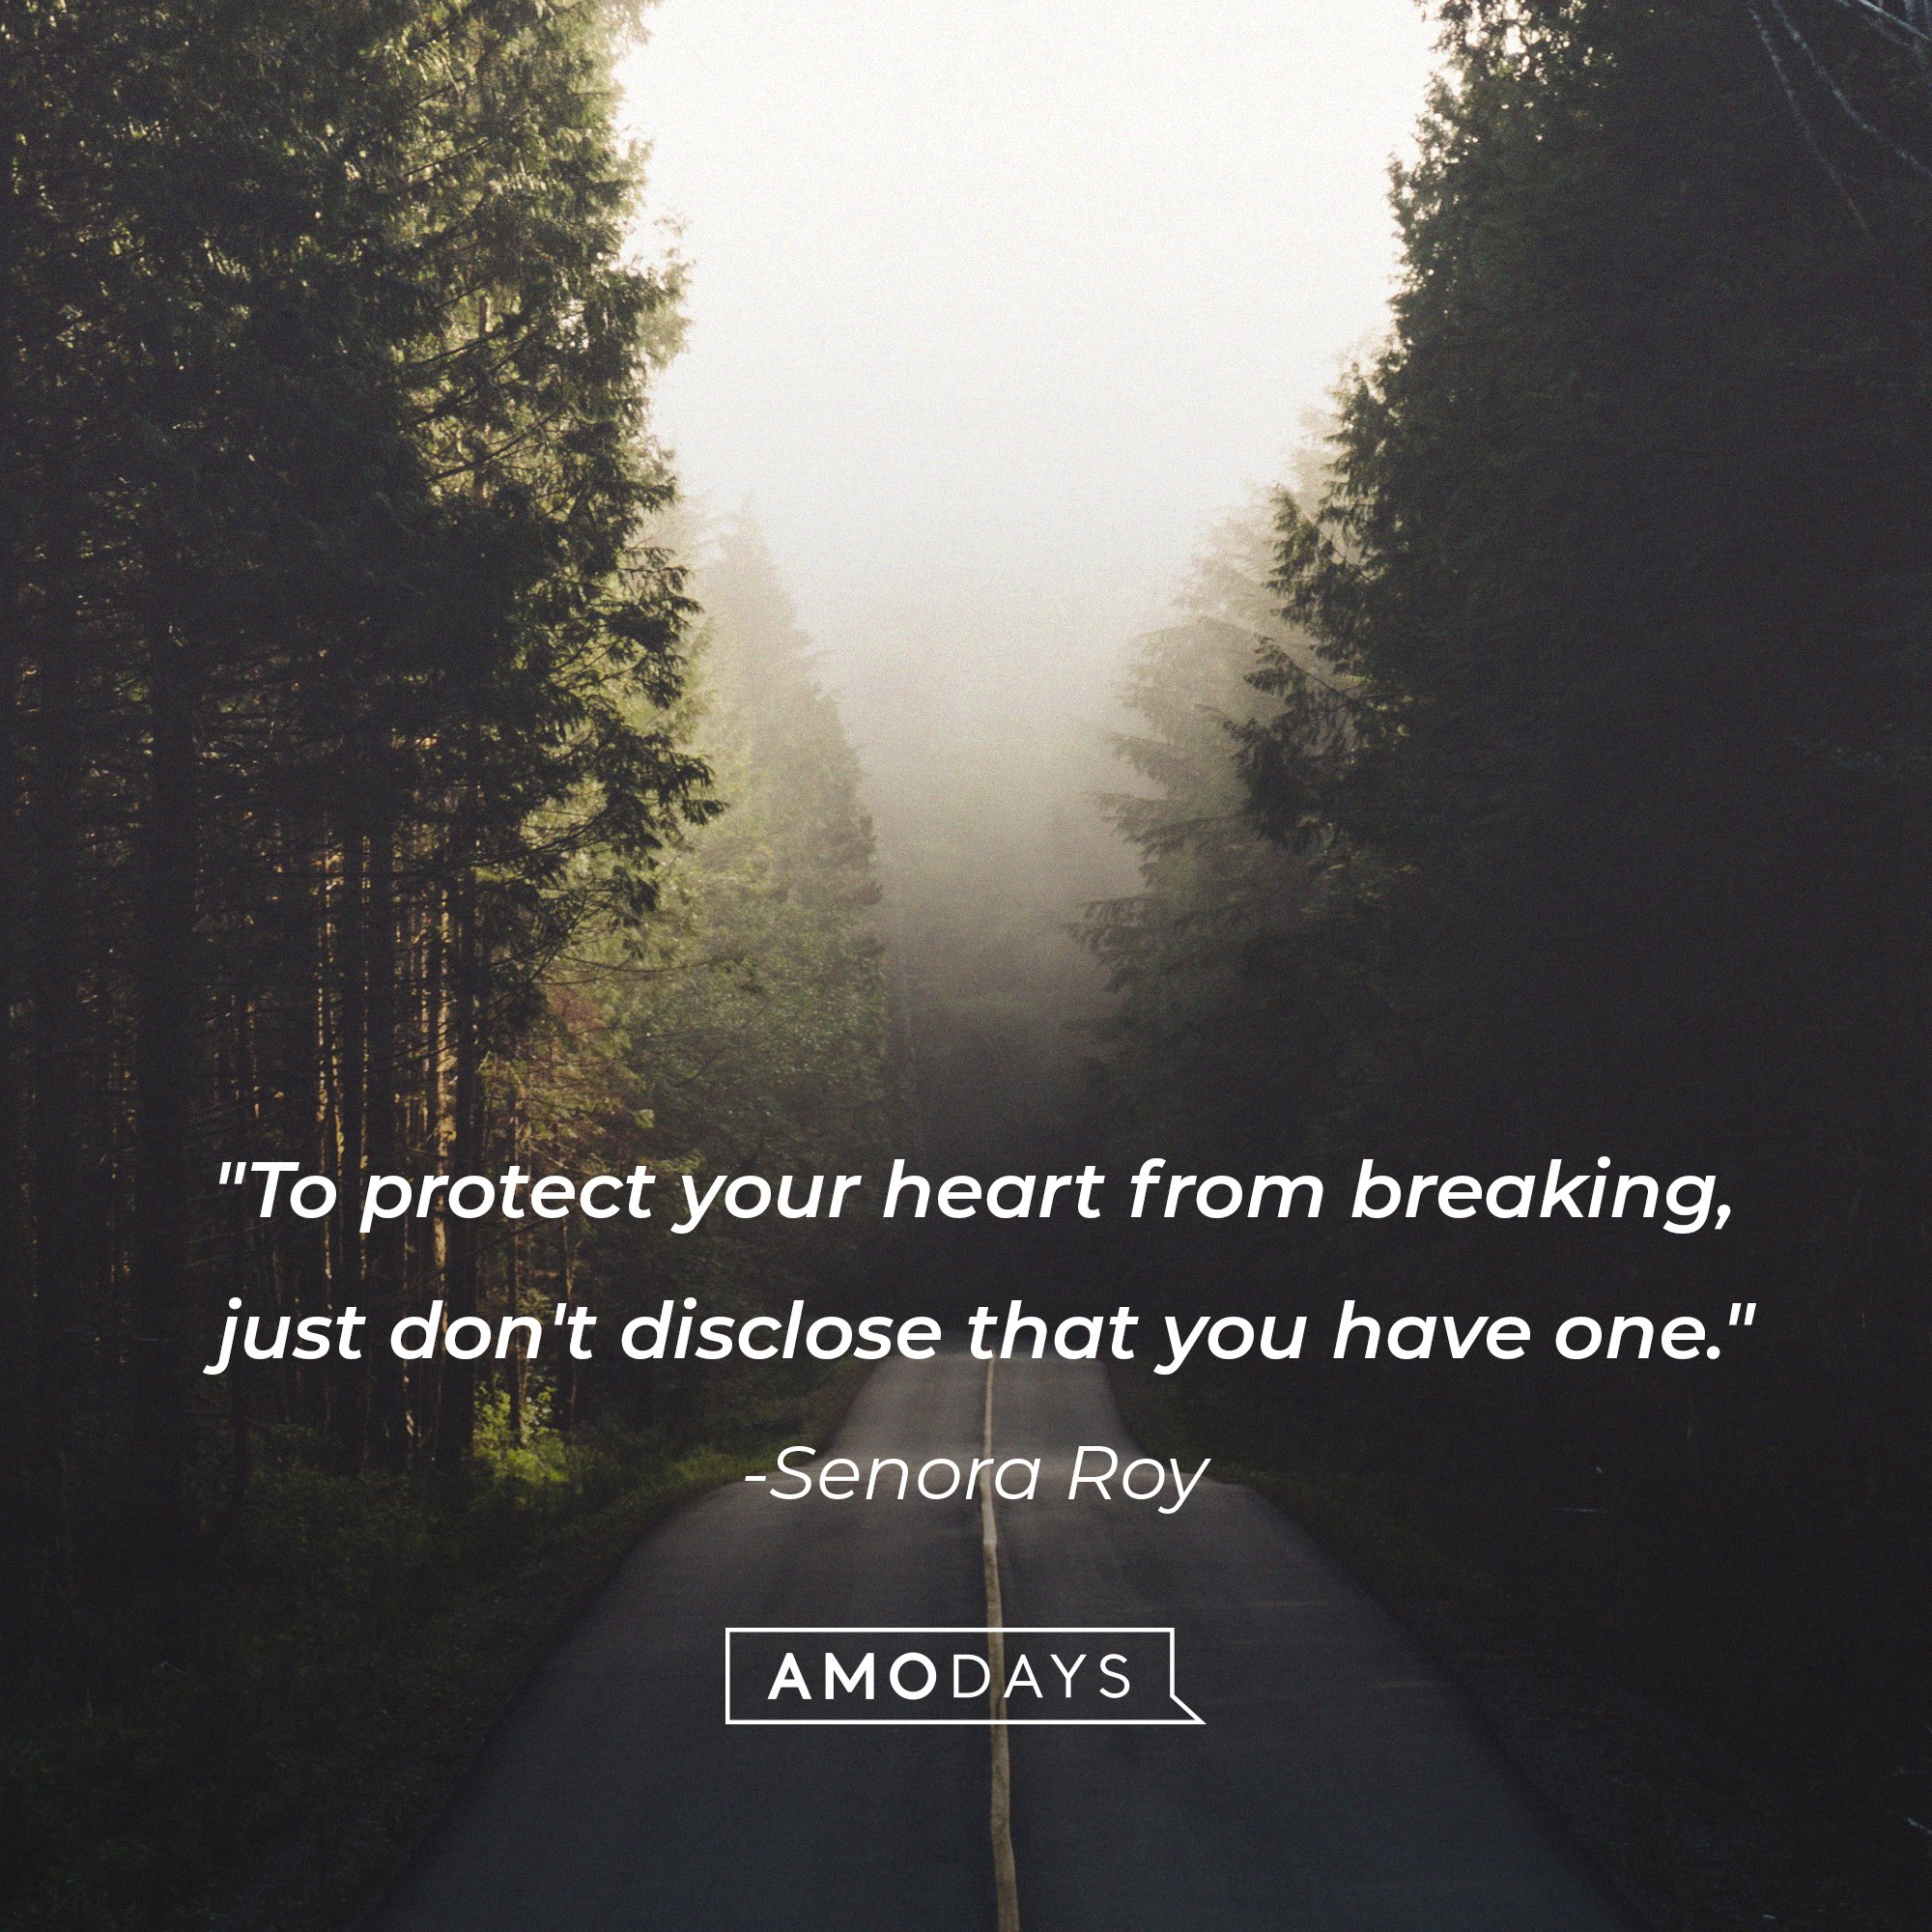 Senora Roy's quote: "To protect your heart from breaking, just don't disclose that you have one." | Image: AmoDays